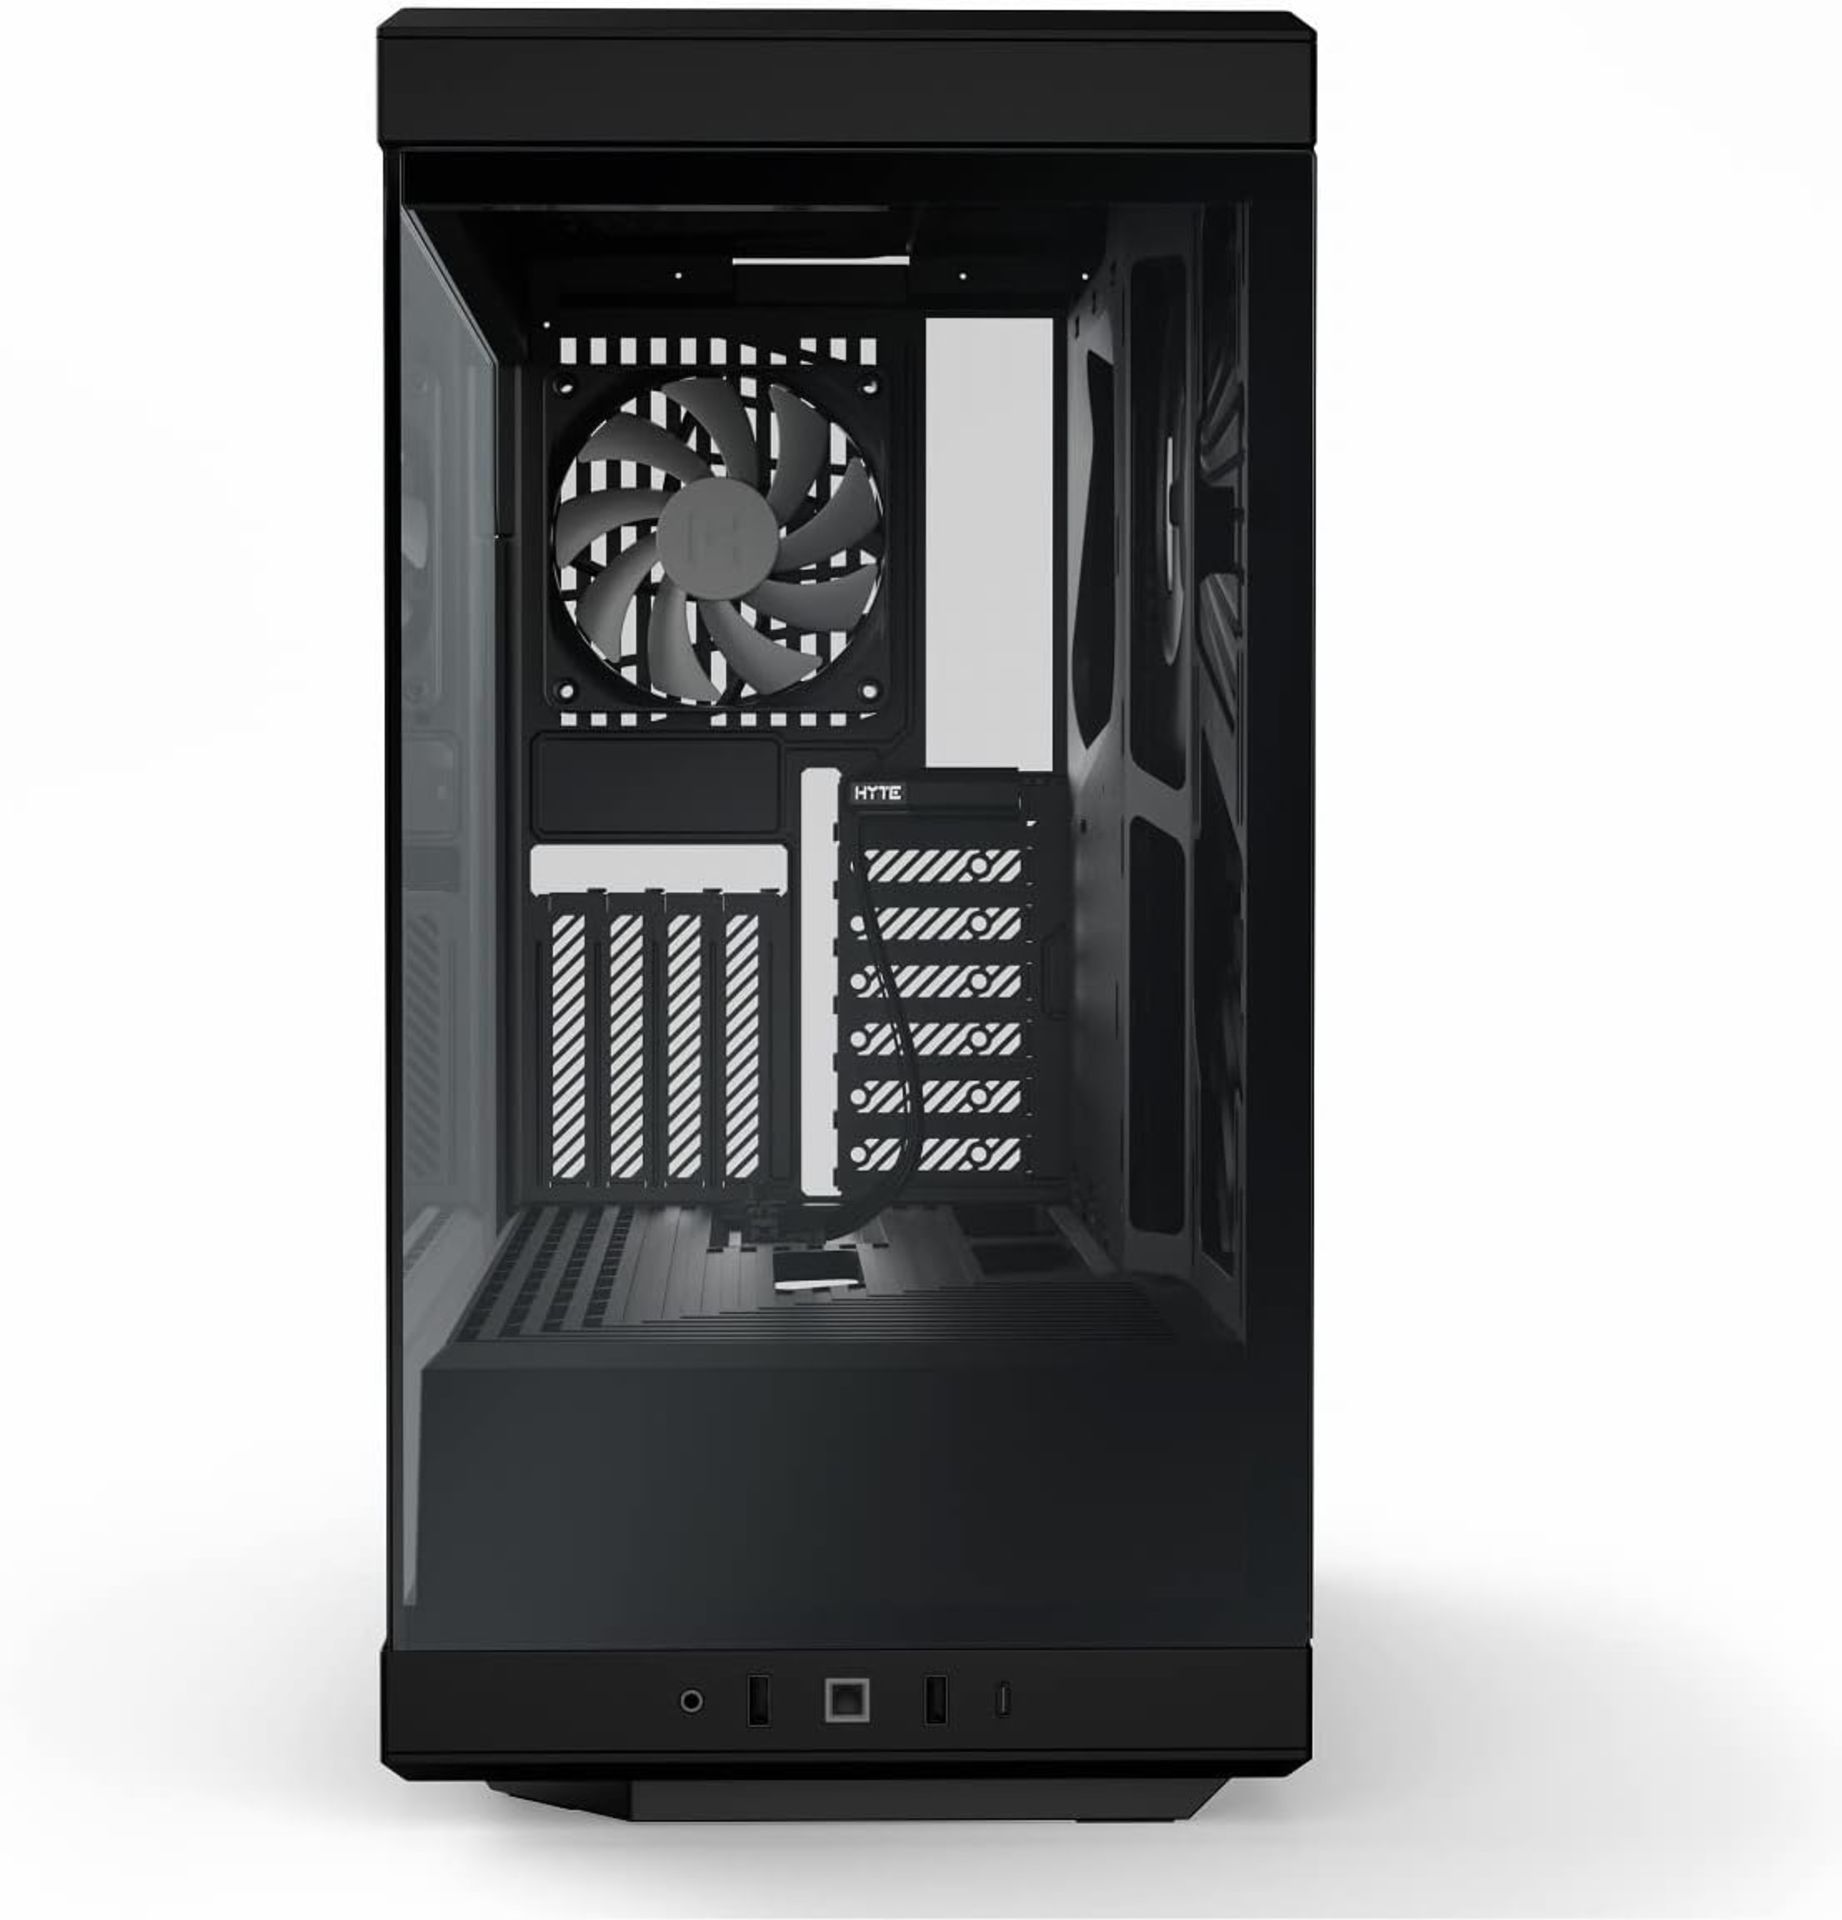 NEW & BOXED HYTE Y40 Mid-Tower ATX Case - Black. RRP £159.98. (R15R). The HYTE Y40 Mid-Tower ATX - Image 2 of 5